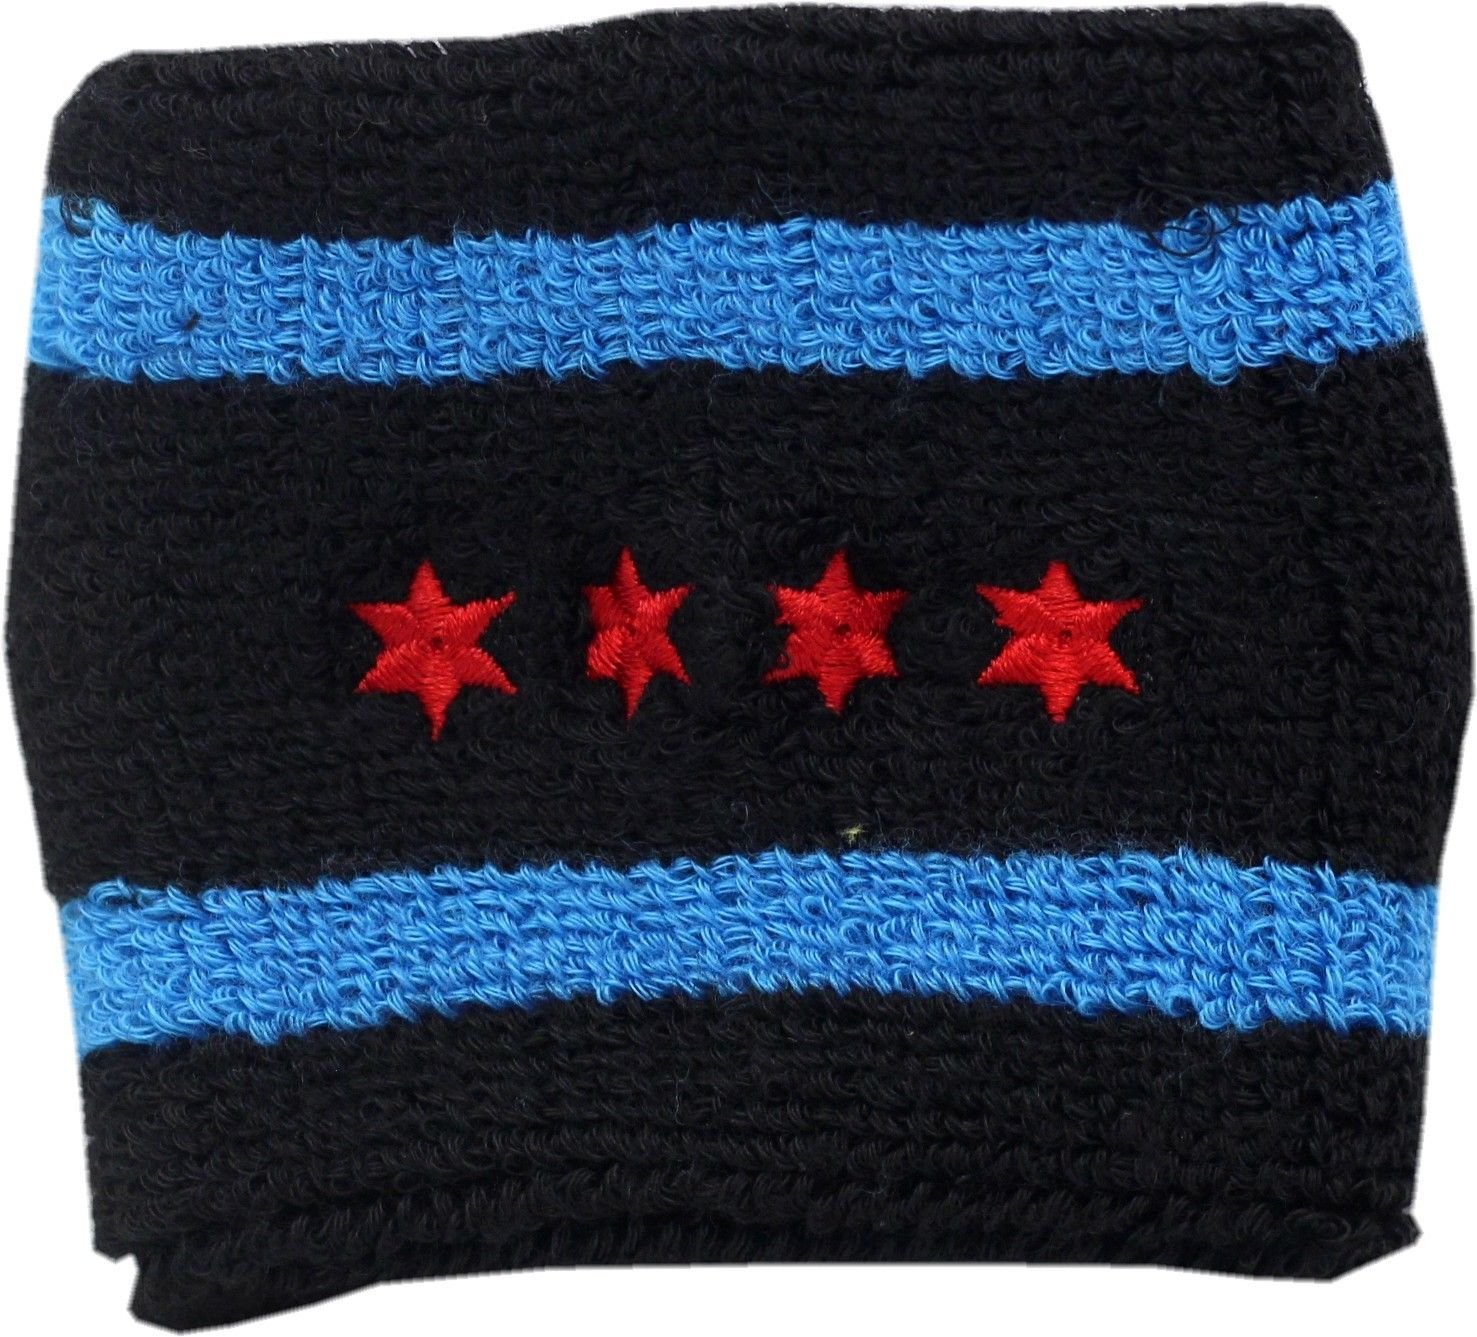 Chicago Police Memorial Foundation Never Forget Arm Band